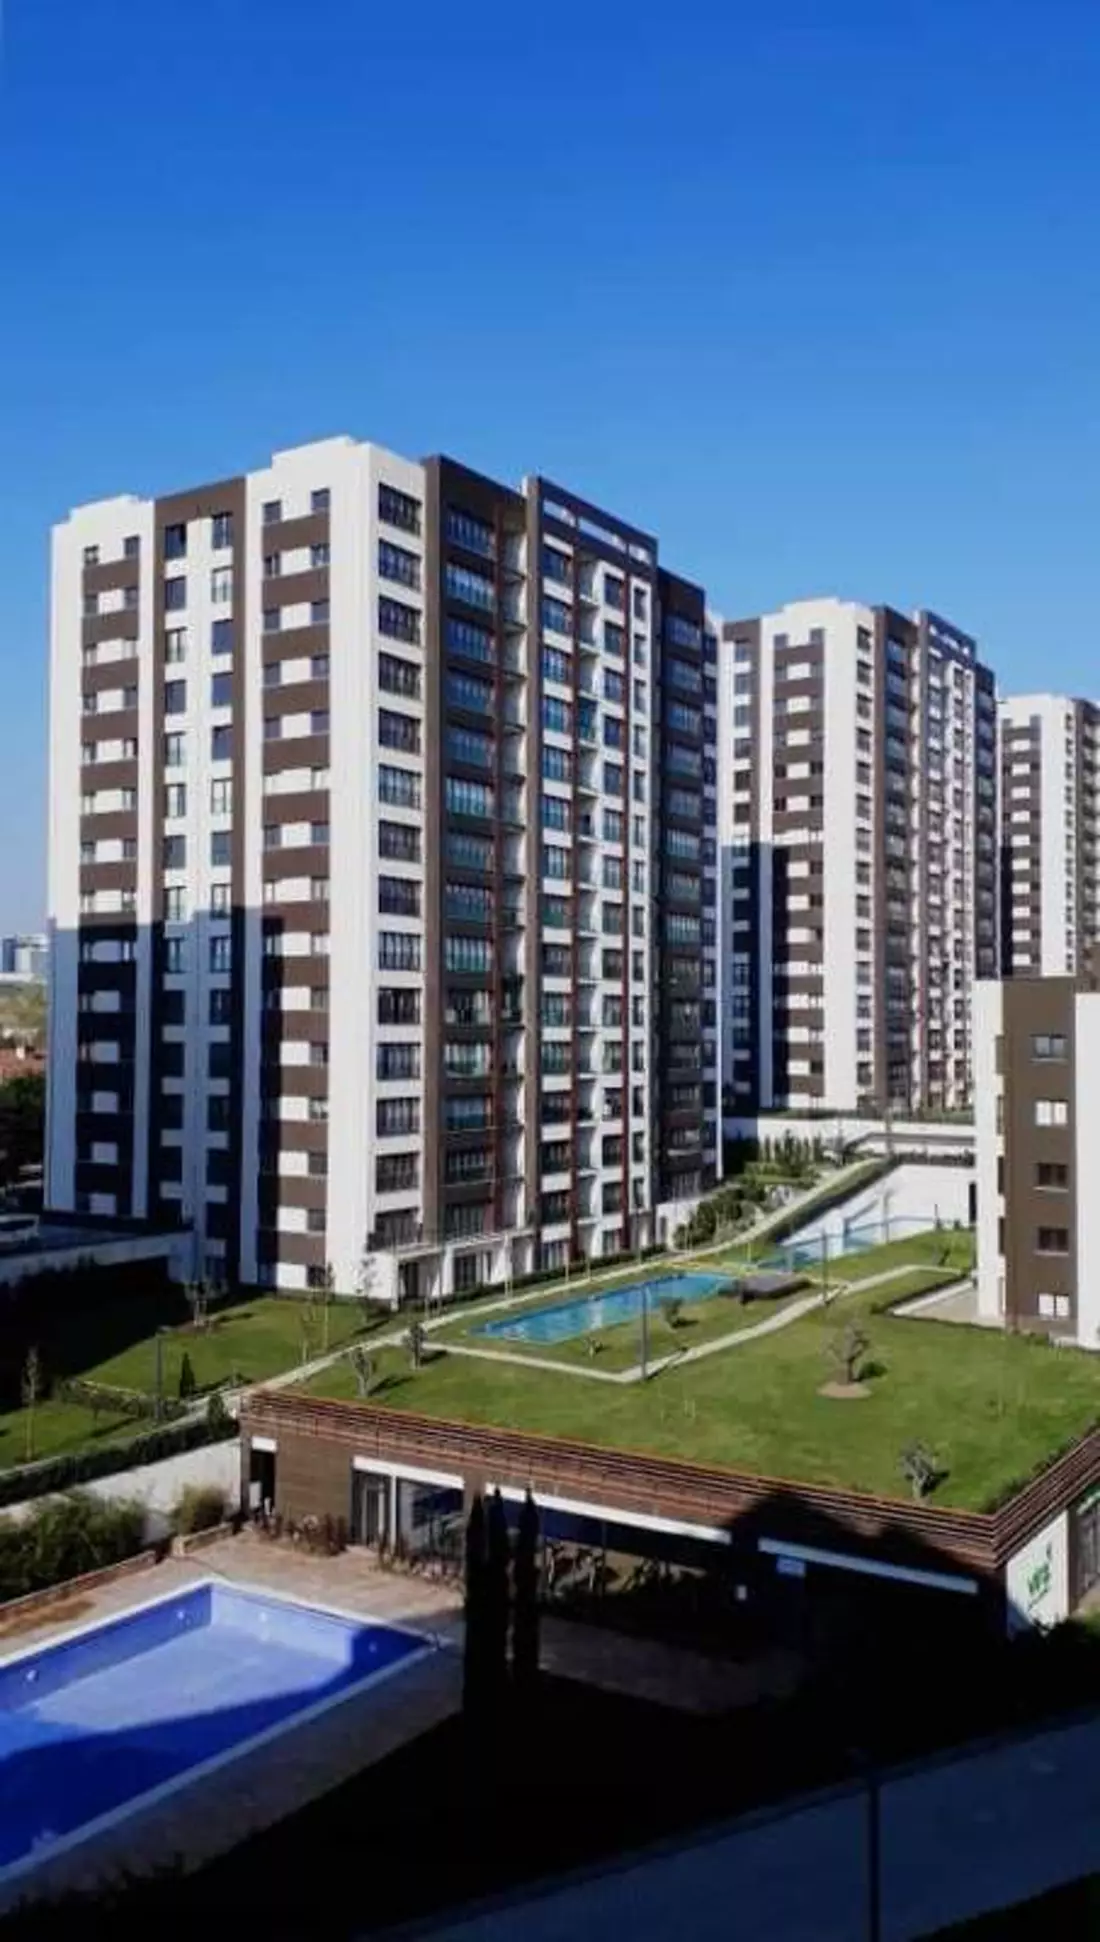 Green Scenery Family Apartments with Excellent Amenities in Central Beylikdüzü İstanbul